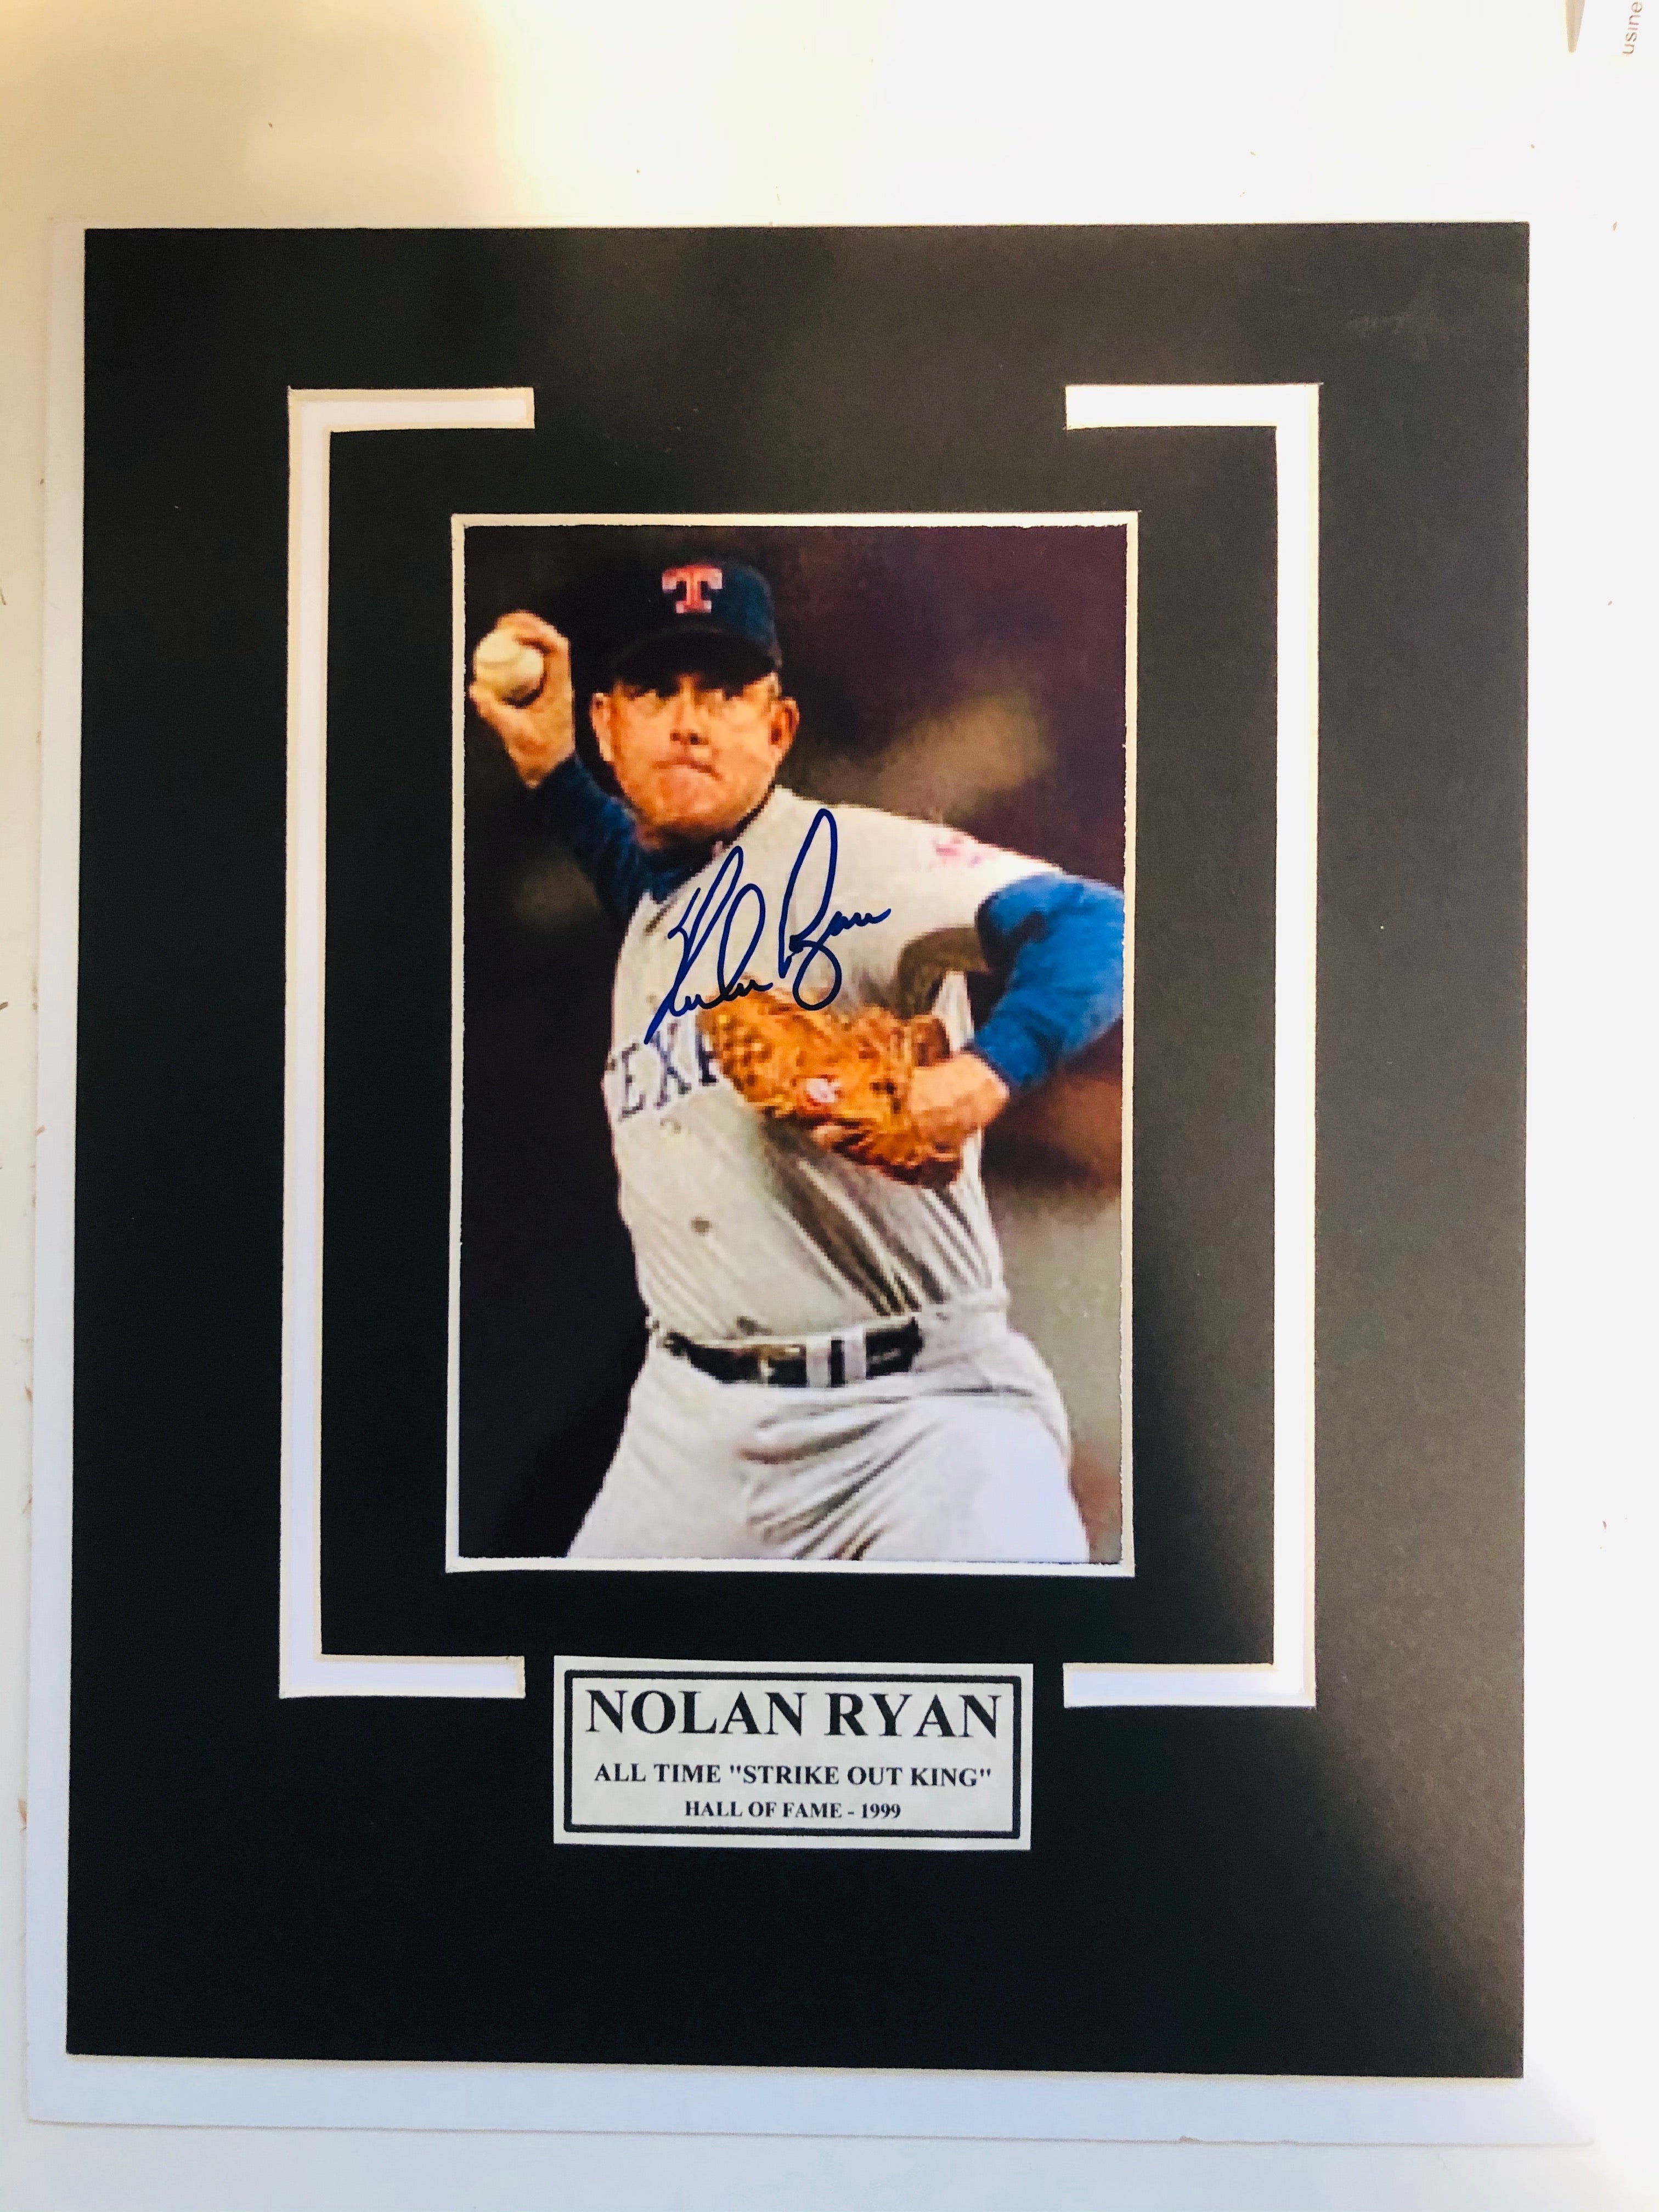 Nolan Ryan strike out king rare signed matted autograph with COA